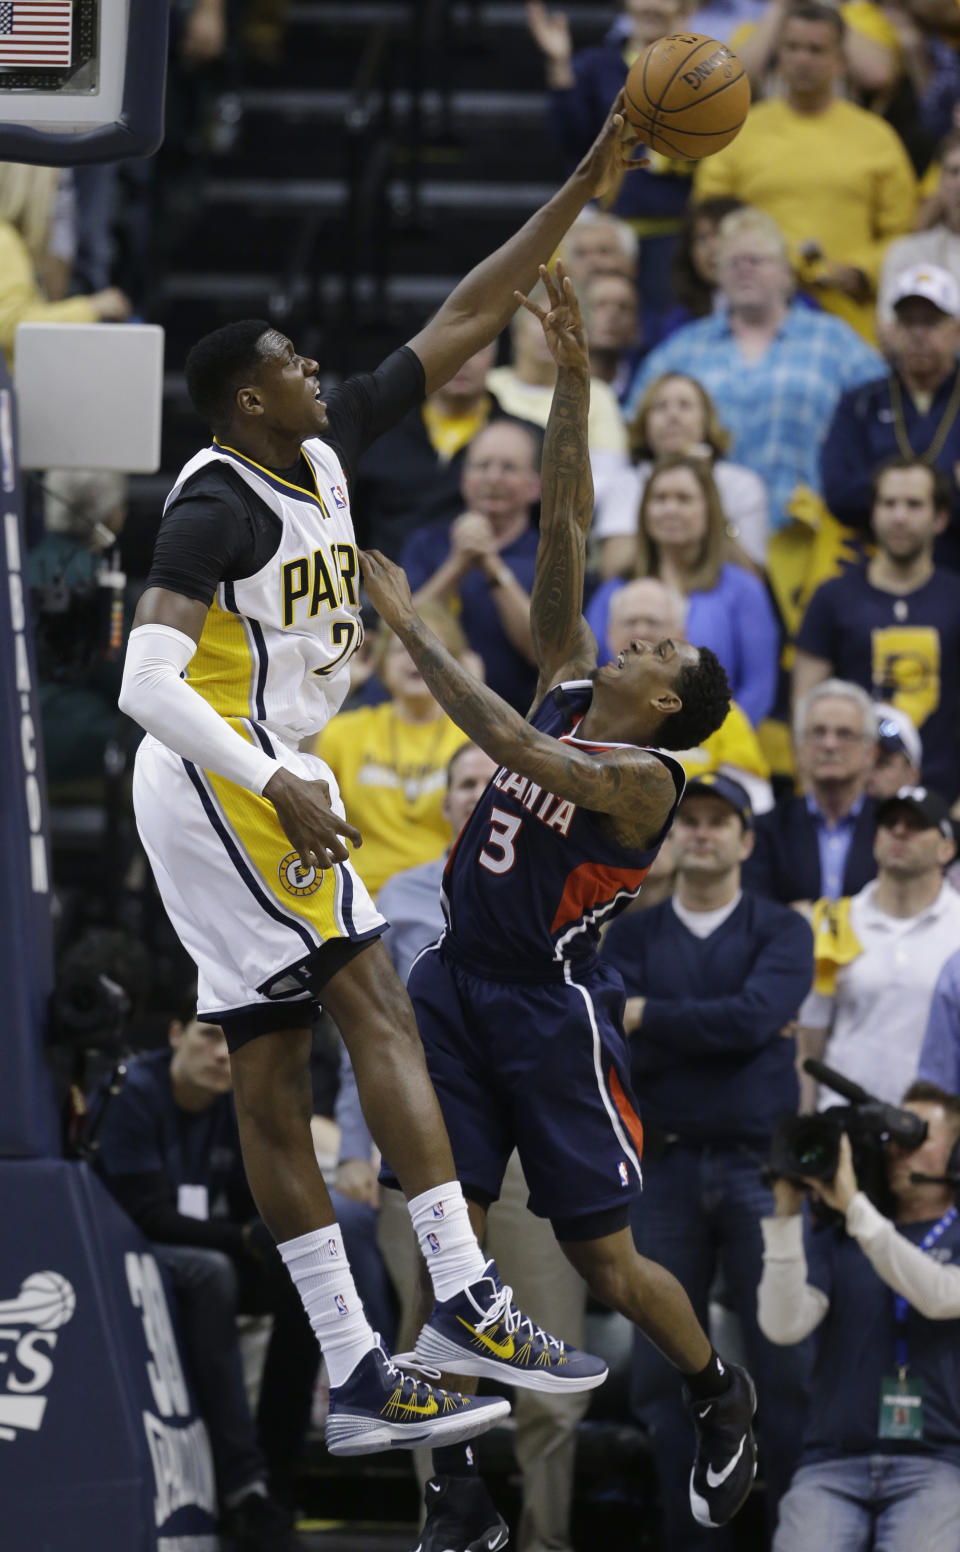 Atlanta Hawks' Louis Williams (3) has his shot blocked by Indiana Pacers' Ian Mahinmi (28) during the second half in Game 2 of an opening-round NBA basketball playoff series Tuesday, April 22, 2014, in Indianapolis. Indiana defeated Atlanta 101-85. (AP Photo/Darron Cummings)